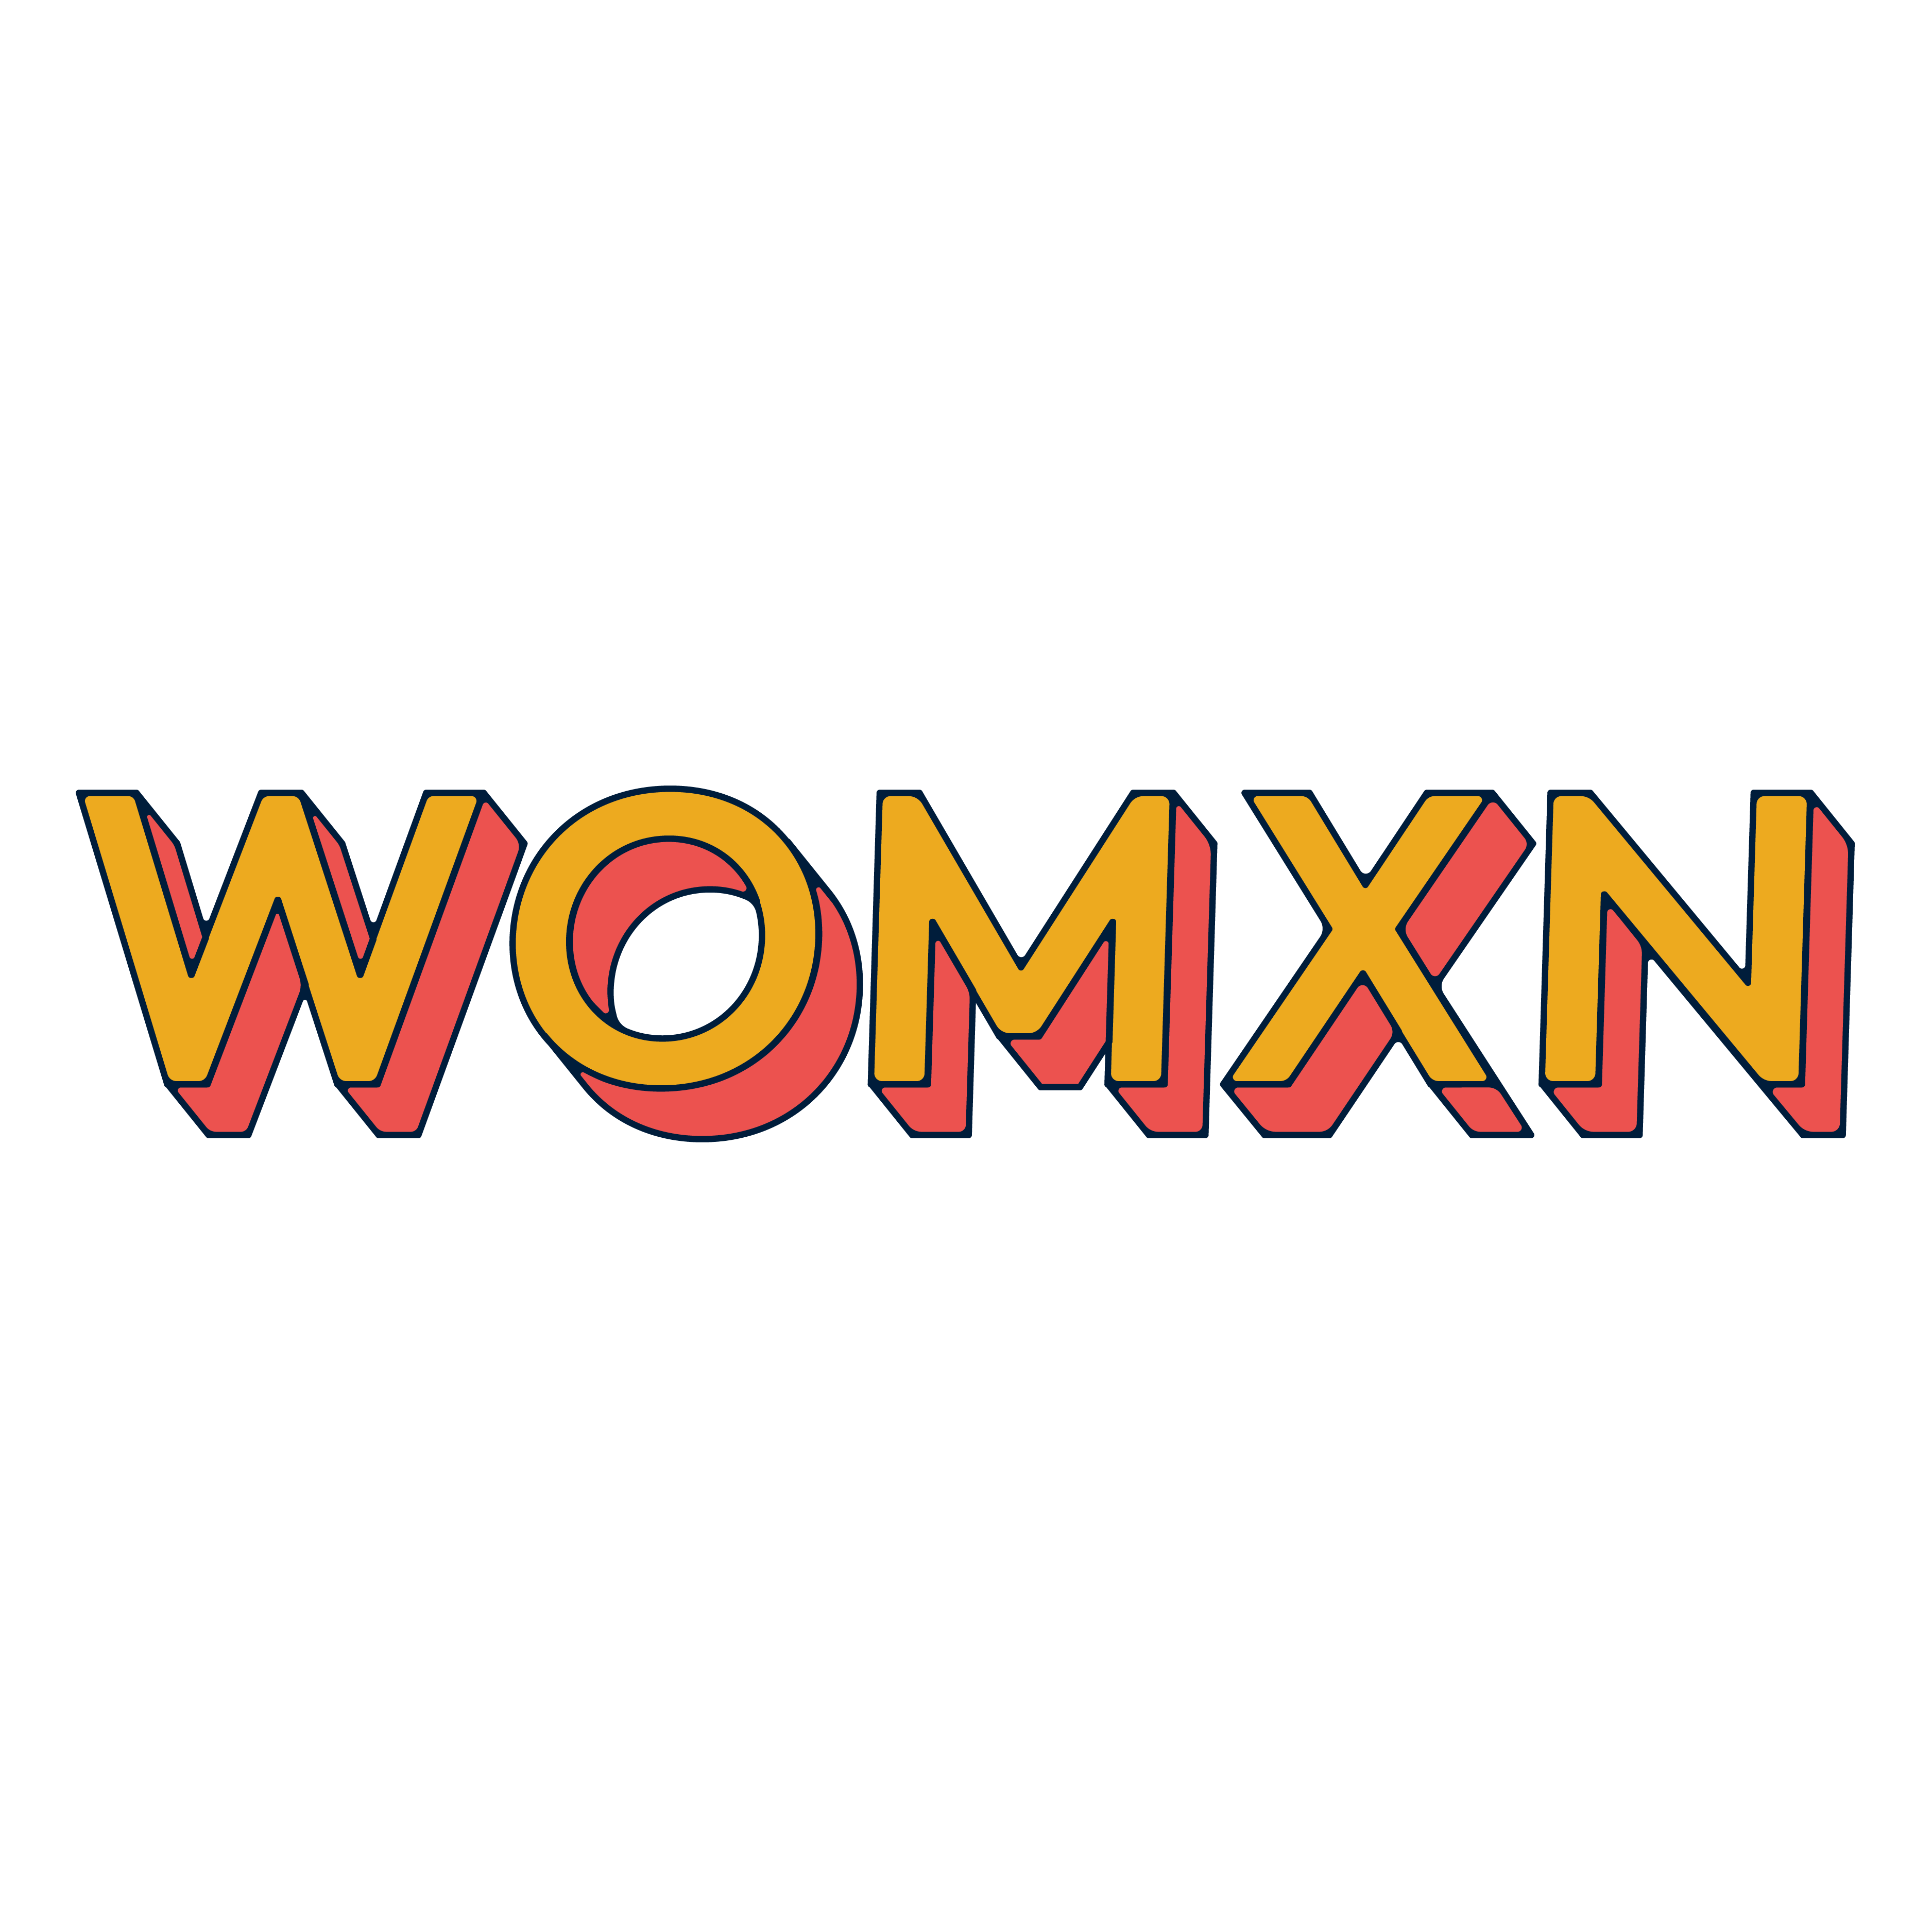 What does the intersectional term 'womxn' mean?